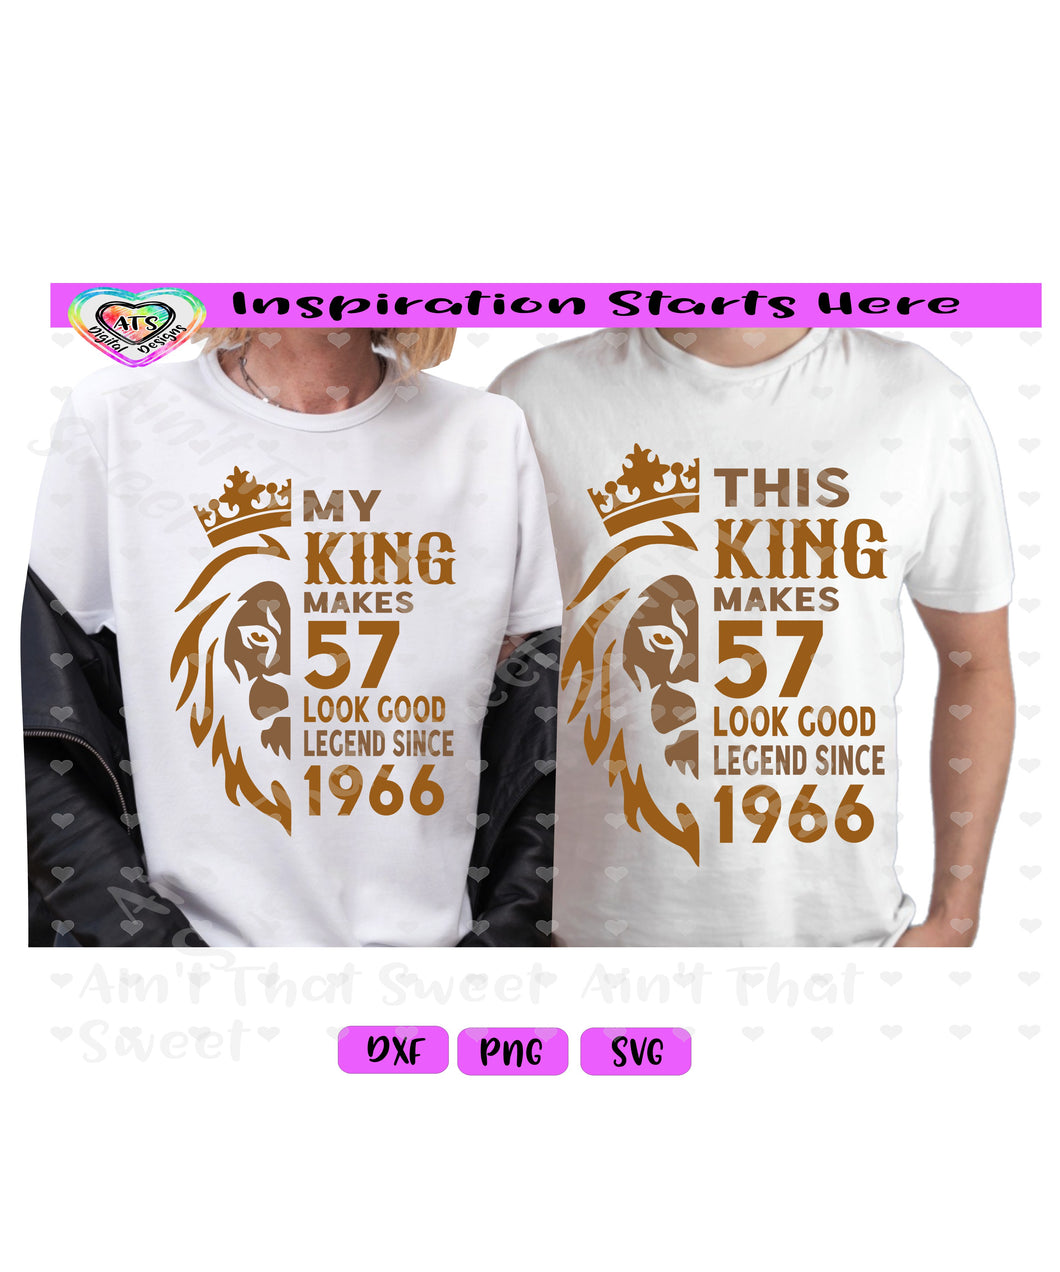 This King Makes 57 Look Good | My King Makes 57 Look Good | Legend Since 1966 (Based on 2023) | Crown | Lion | SET - Transparent PNG SVG DXF - Silhouette, Cricut, ScanNCut